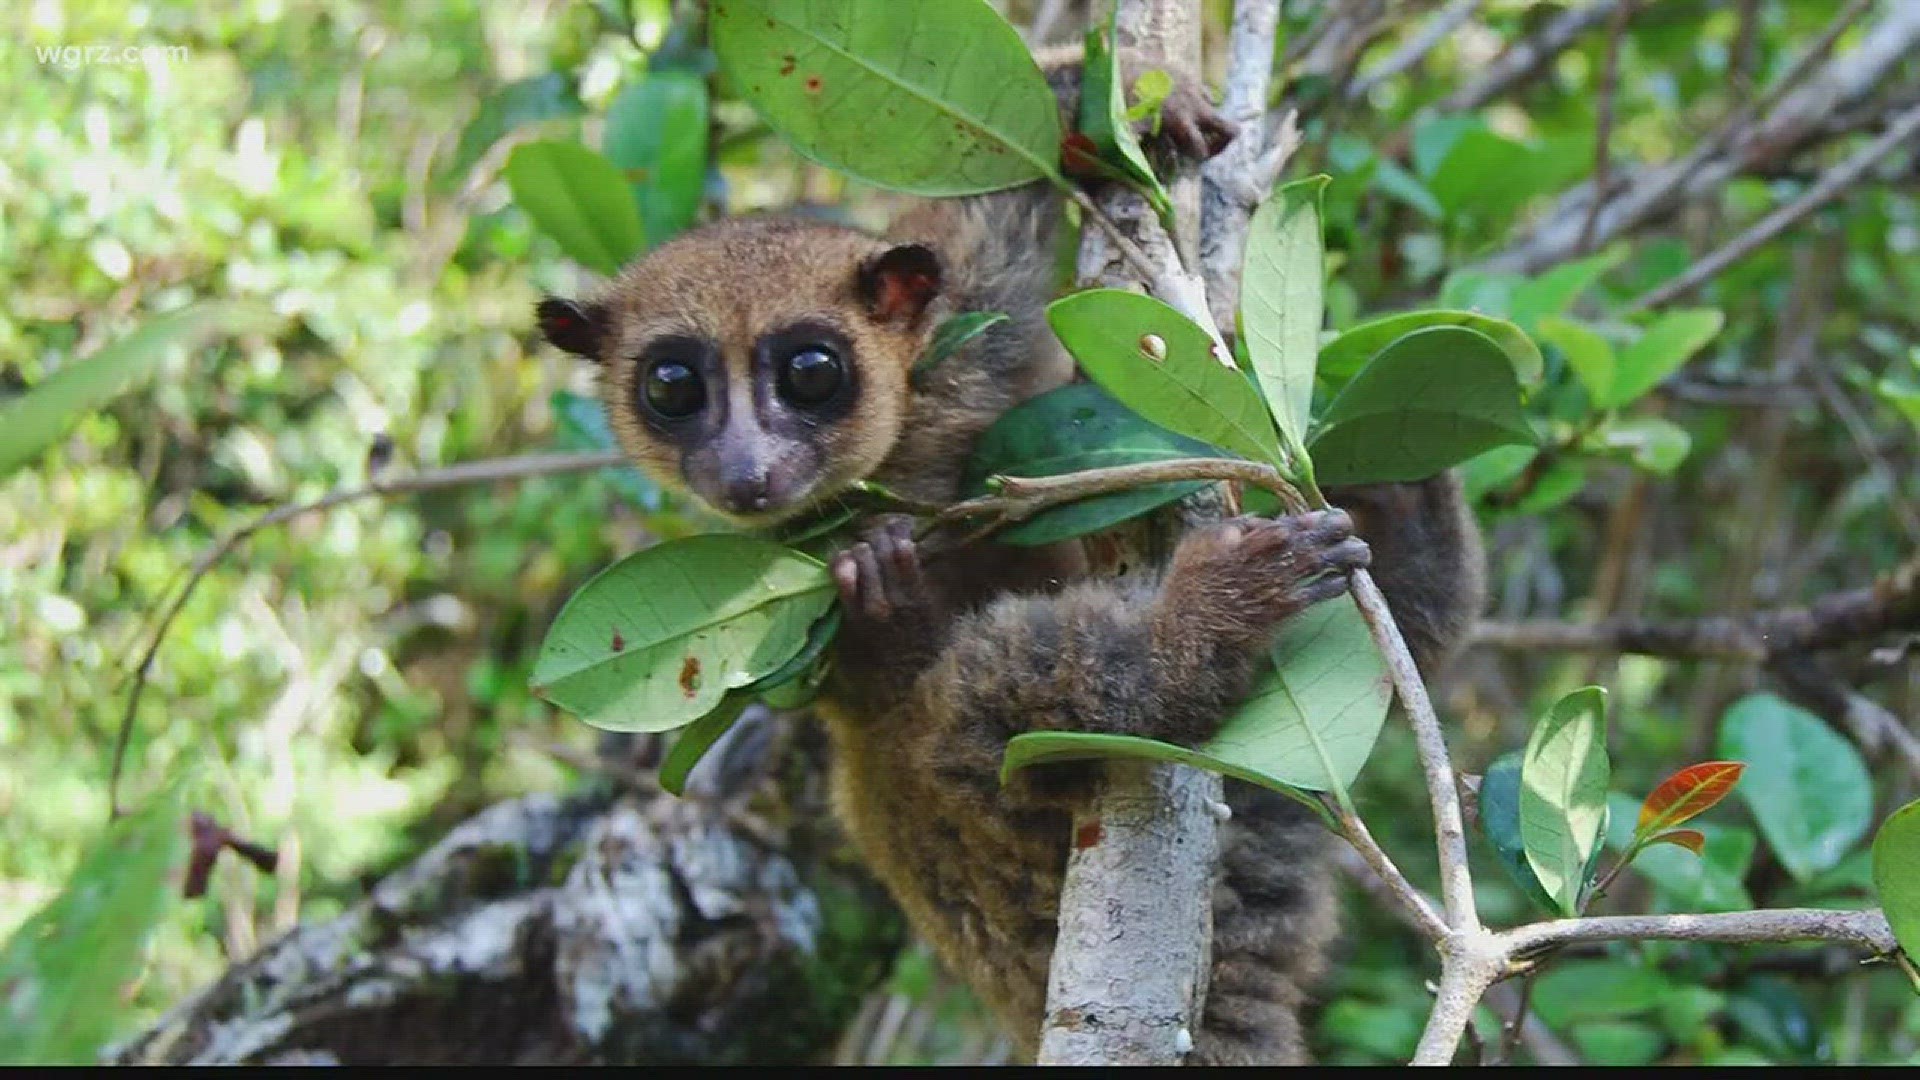 A SUNY Polytechnic professor was one of the researchers who helped discover the Groves' dwarf lemur.